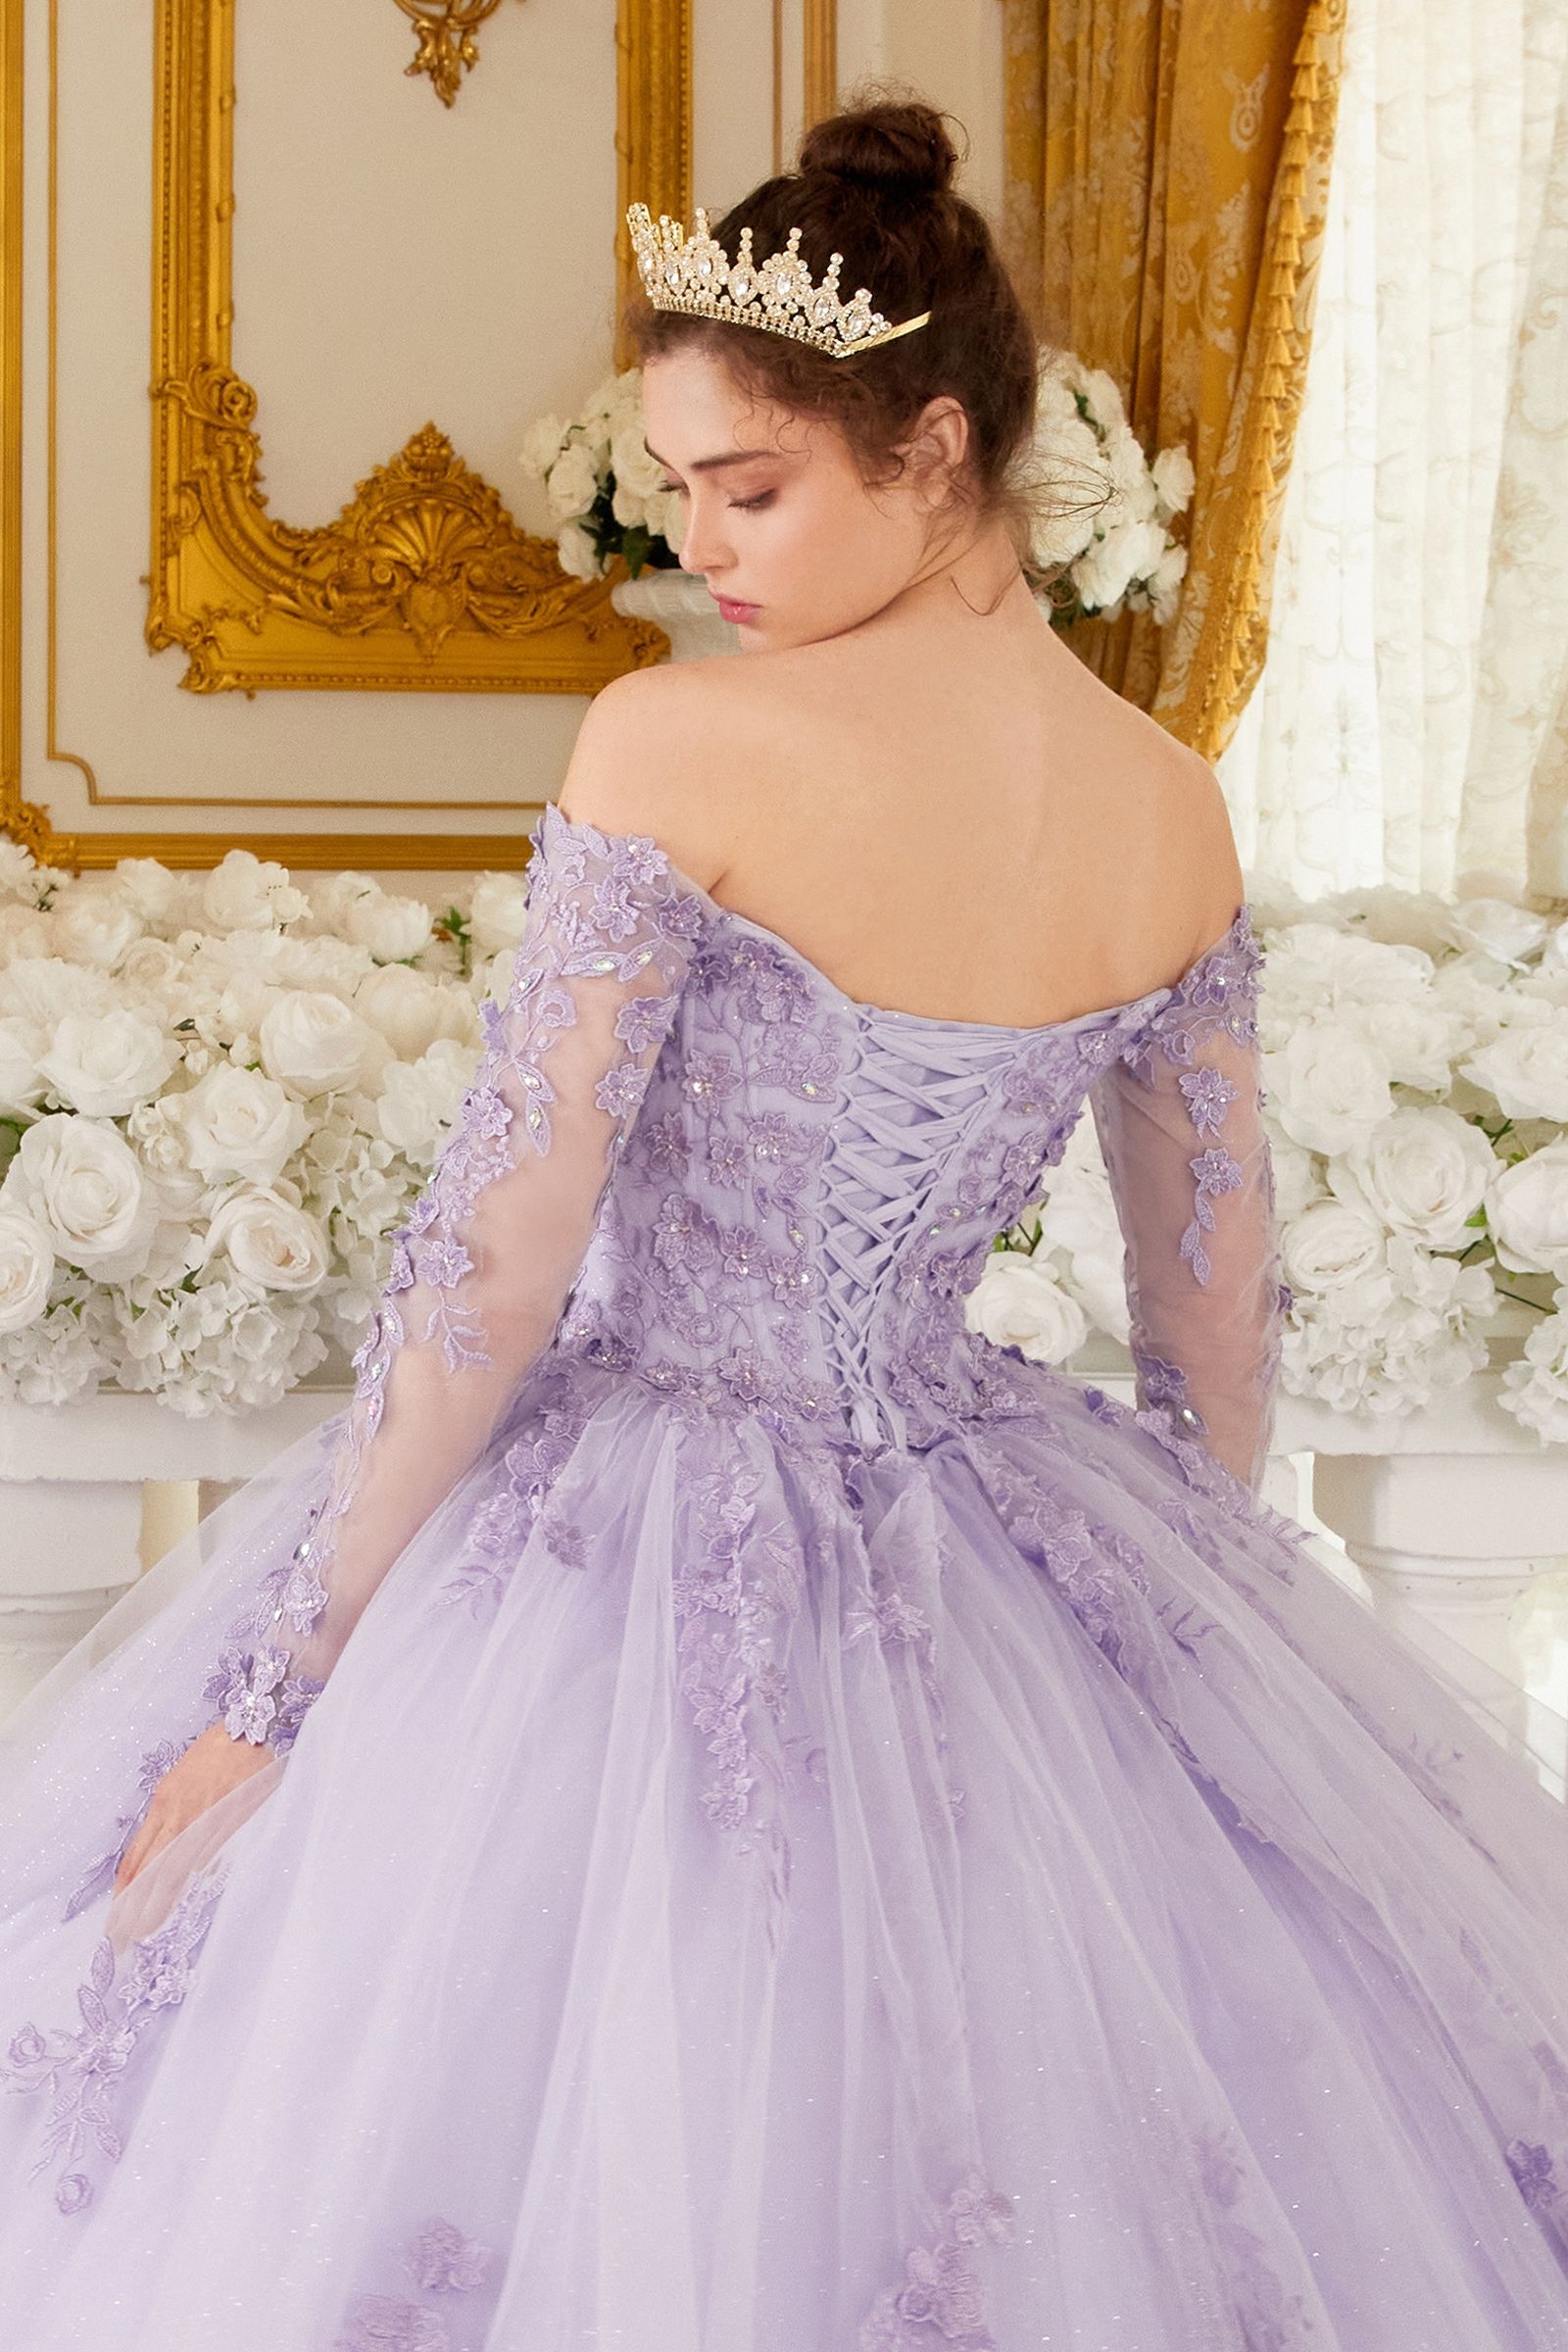 This Ladivine 15706 dress will have you feeling like royalty! The off-the-shoulder style and lacy corset make it perfect for your quinceanera or special event. Get ready for the night of a lifetime in this absolutely stunning ballgown! Imagine looking like royalty on your special day. This gorgeous off-the-shoulder, long-sleeved ball gown is an enchanting piece of work that will make you look like a quinceanera princess! The crafted lace and beaded applique add the perfect amount of shine to the bodice. 